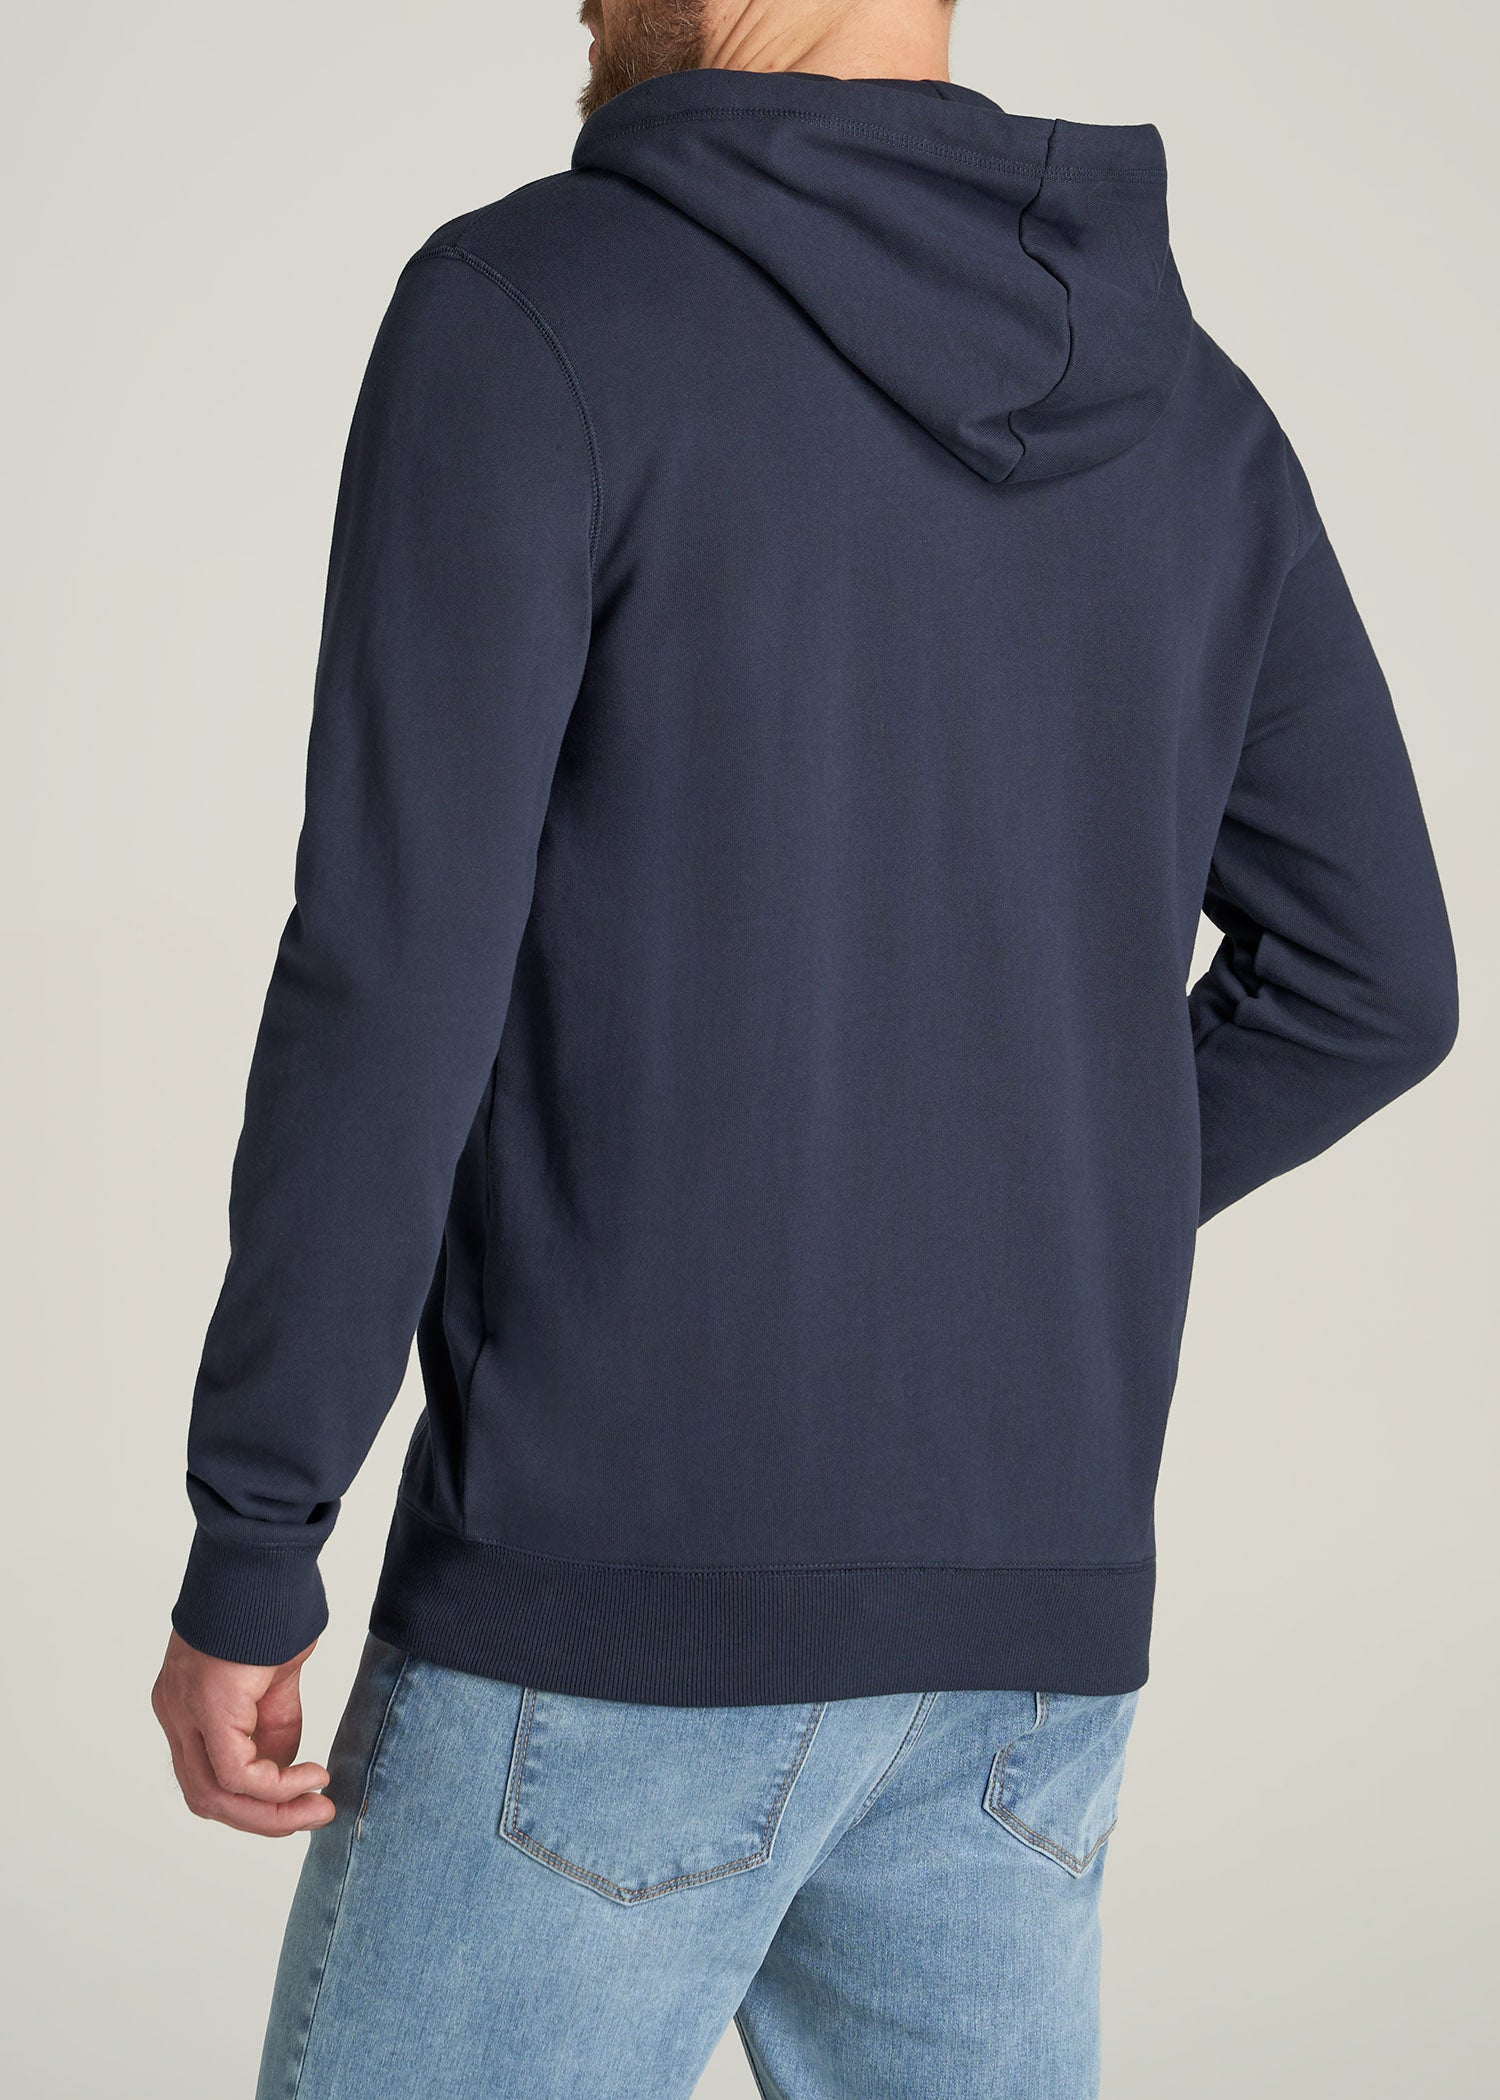 Men's Tall French Terry Zip Navy Hoodie | American Tall